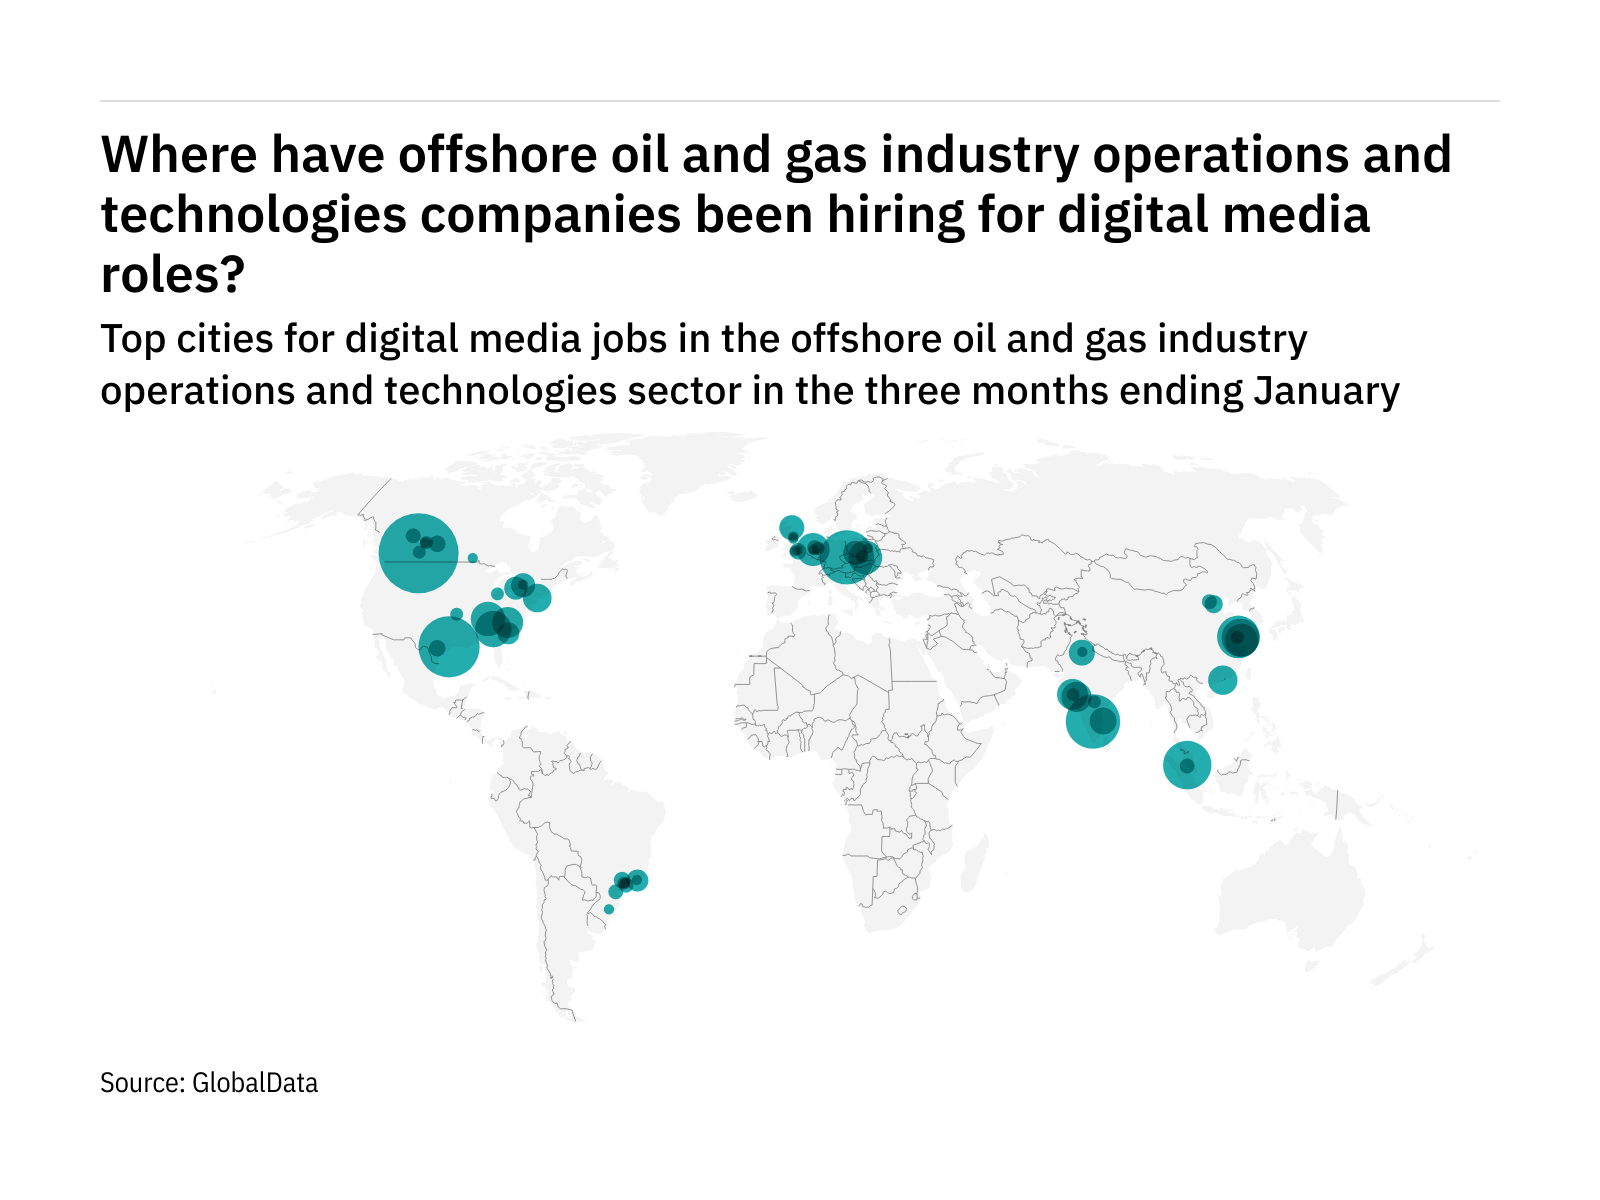 Asia-Pacific is seeing a hiring boom in offshore industry digital media roles